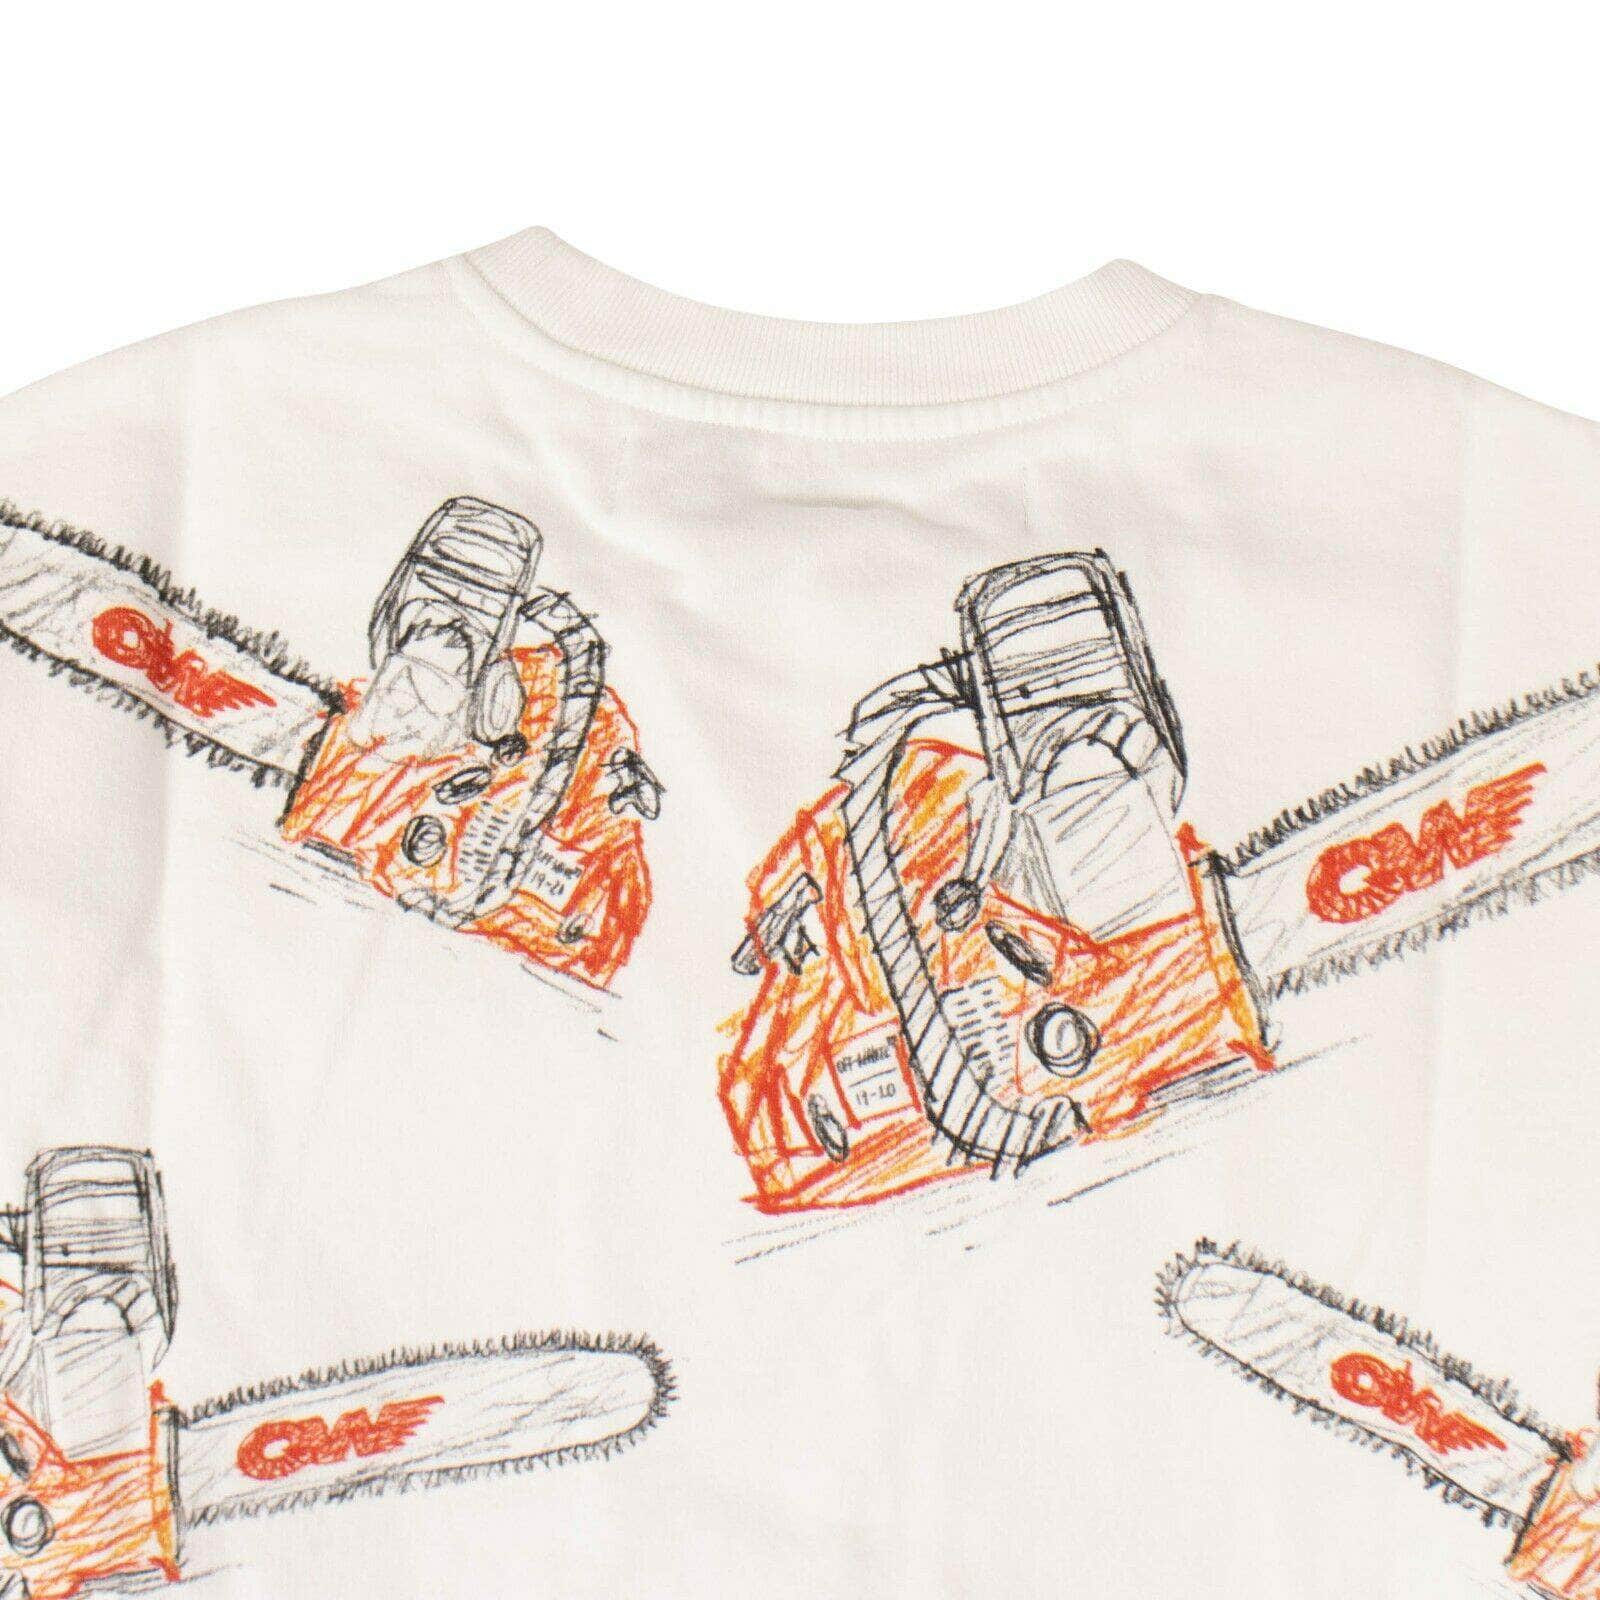 OFF-WHITE c/o VIRGIL ABLOH 250-500, channelenable-all, chicmi, couponcollection, gender-mens, main-clothing, off-white-c-o-virgil-abloh, owch, size-l, size-m, size-s, size-xl, size-xs, size-xxl, size-xxs White Chainsaw Sweatshirt